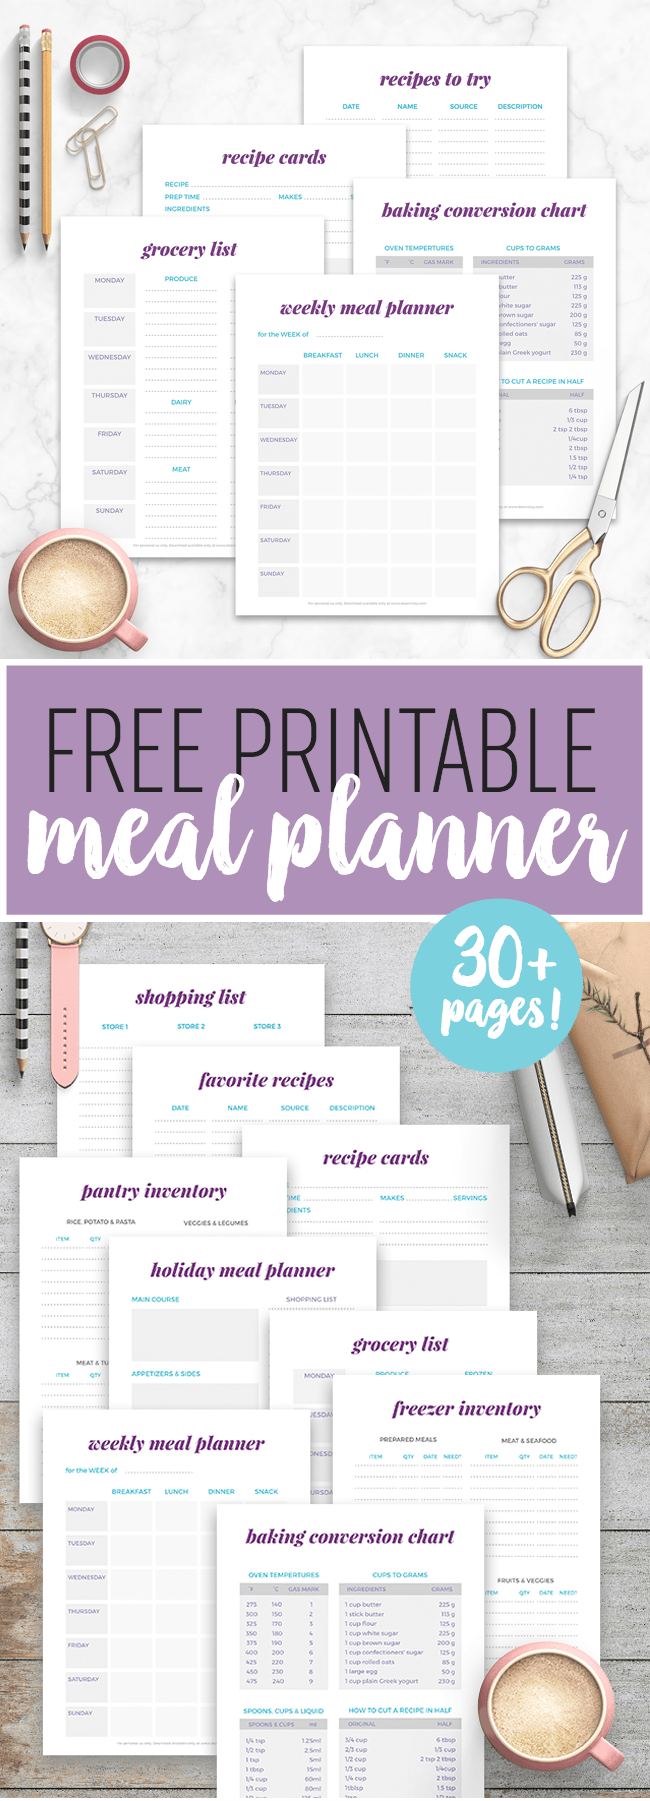 Free Printable Meal Planners For Busy People Chasing A 